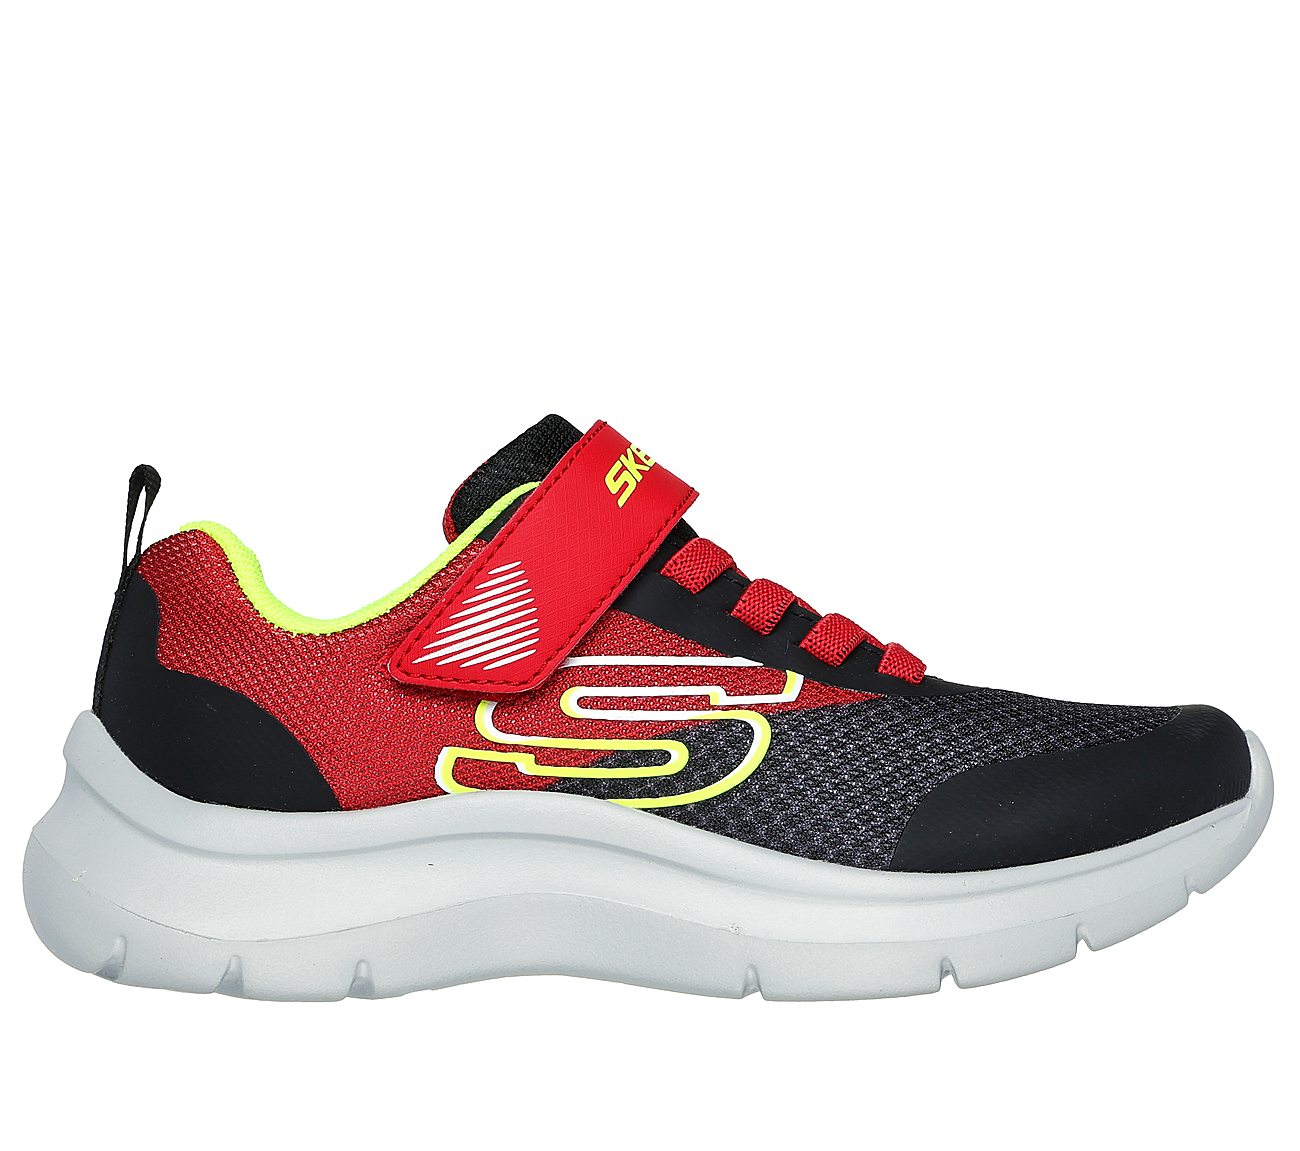 SKECH FAST - SOLAR-SQUAD, RED/BLACK Footwear Lateral View